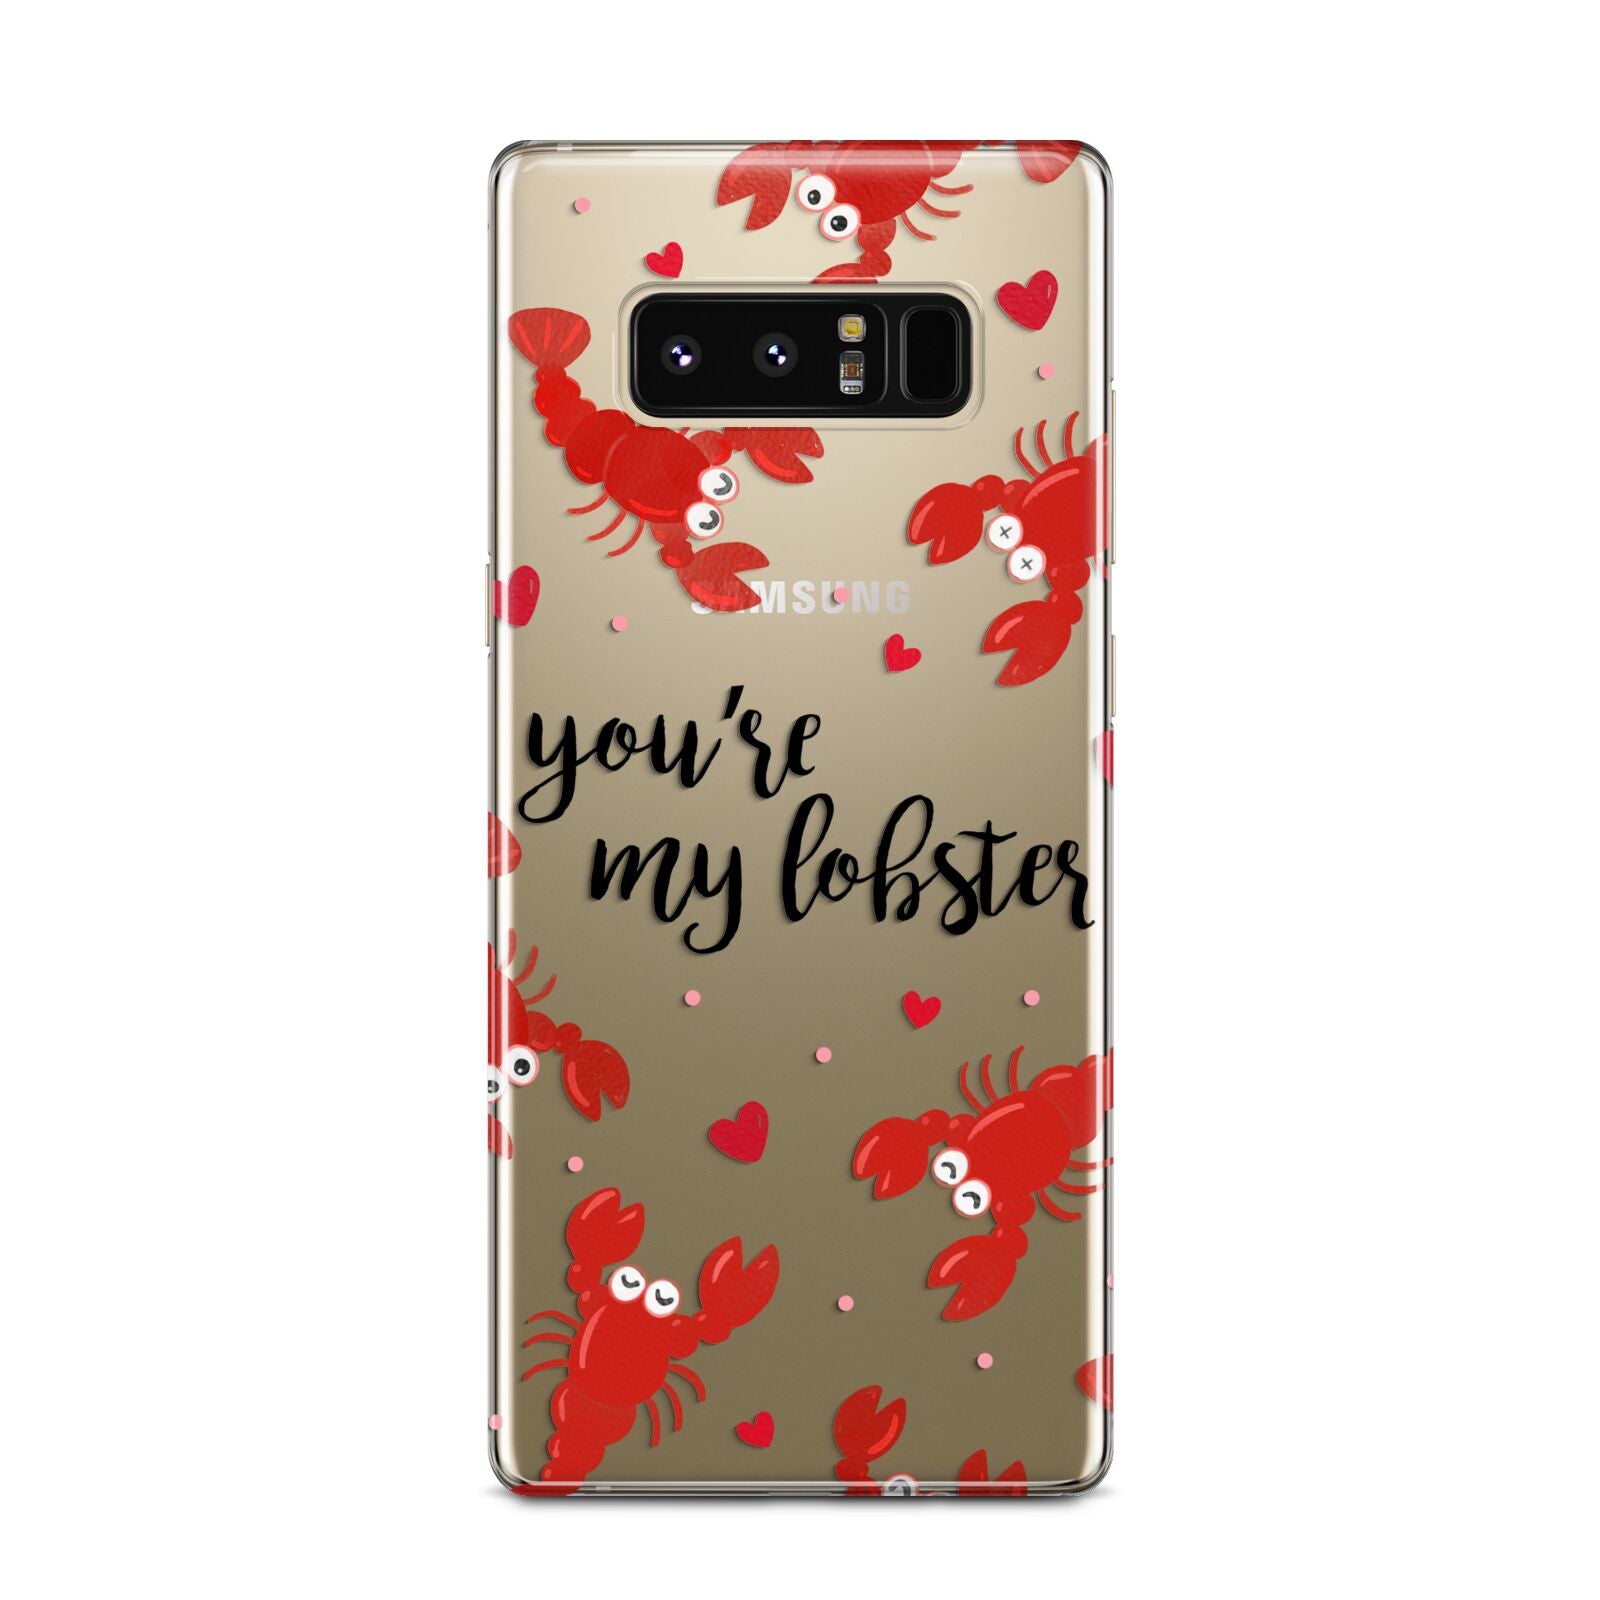 Youre My Lobster Samsung Galaxy Note 8 Case